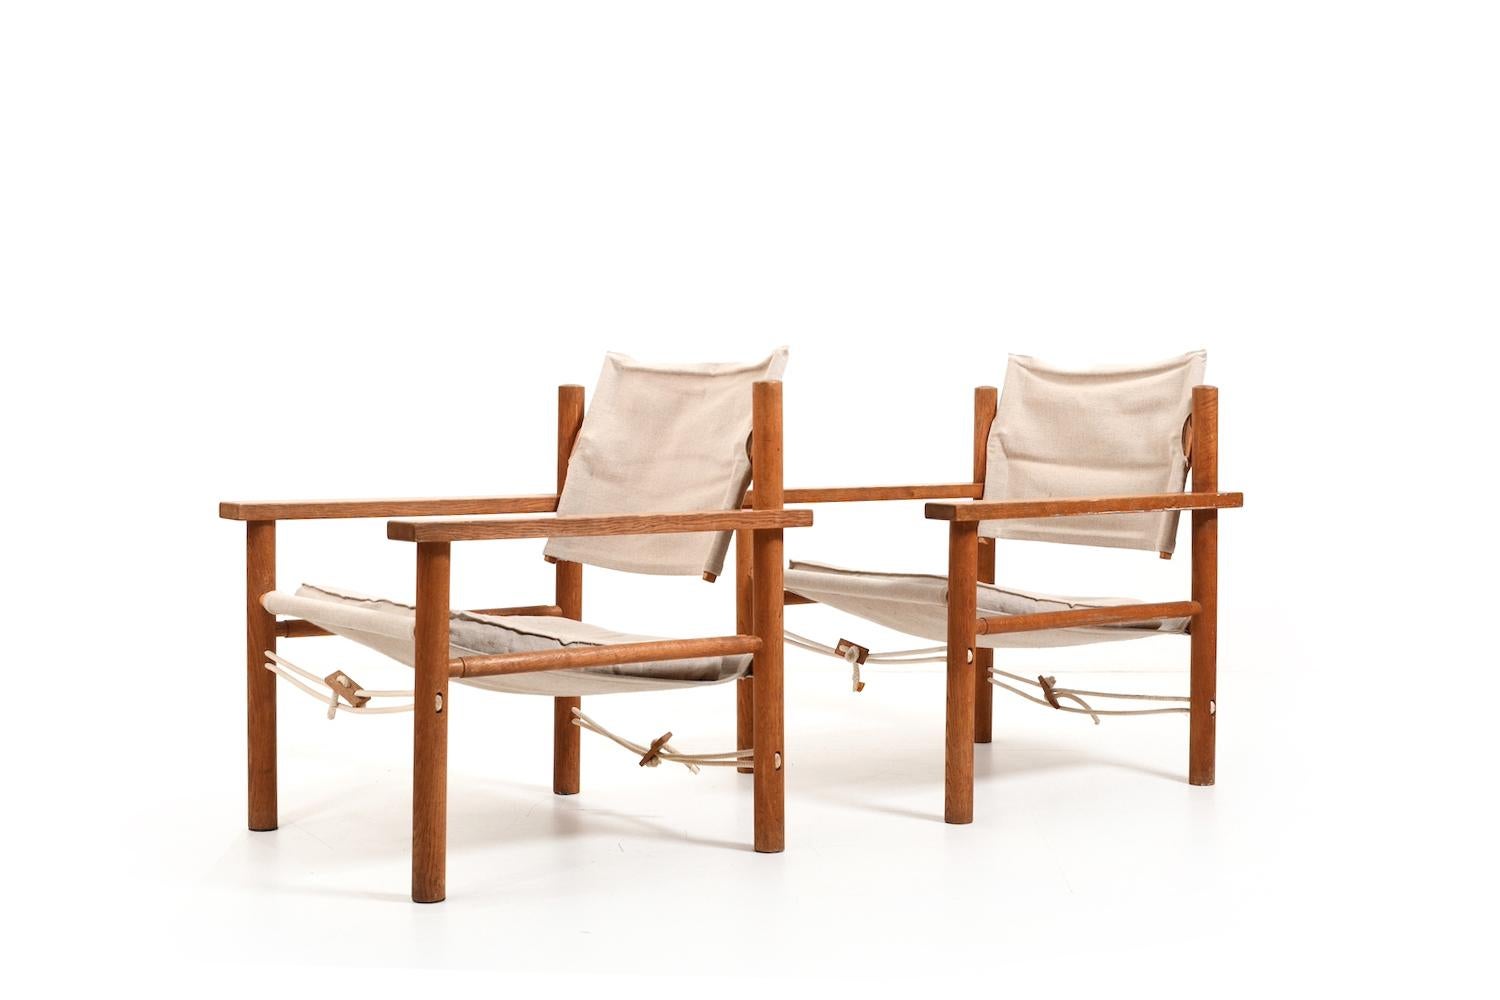 Pair Safari easychairs in solid oak  and with linen cushions and fabric. unknown danish designer & producer early 1960s. Very good quality.